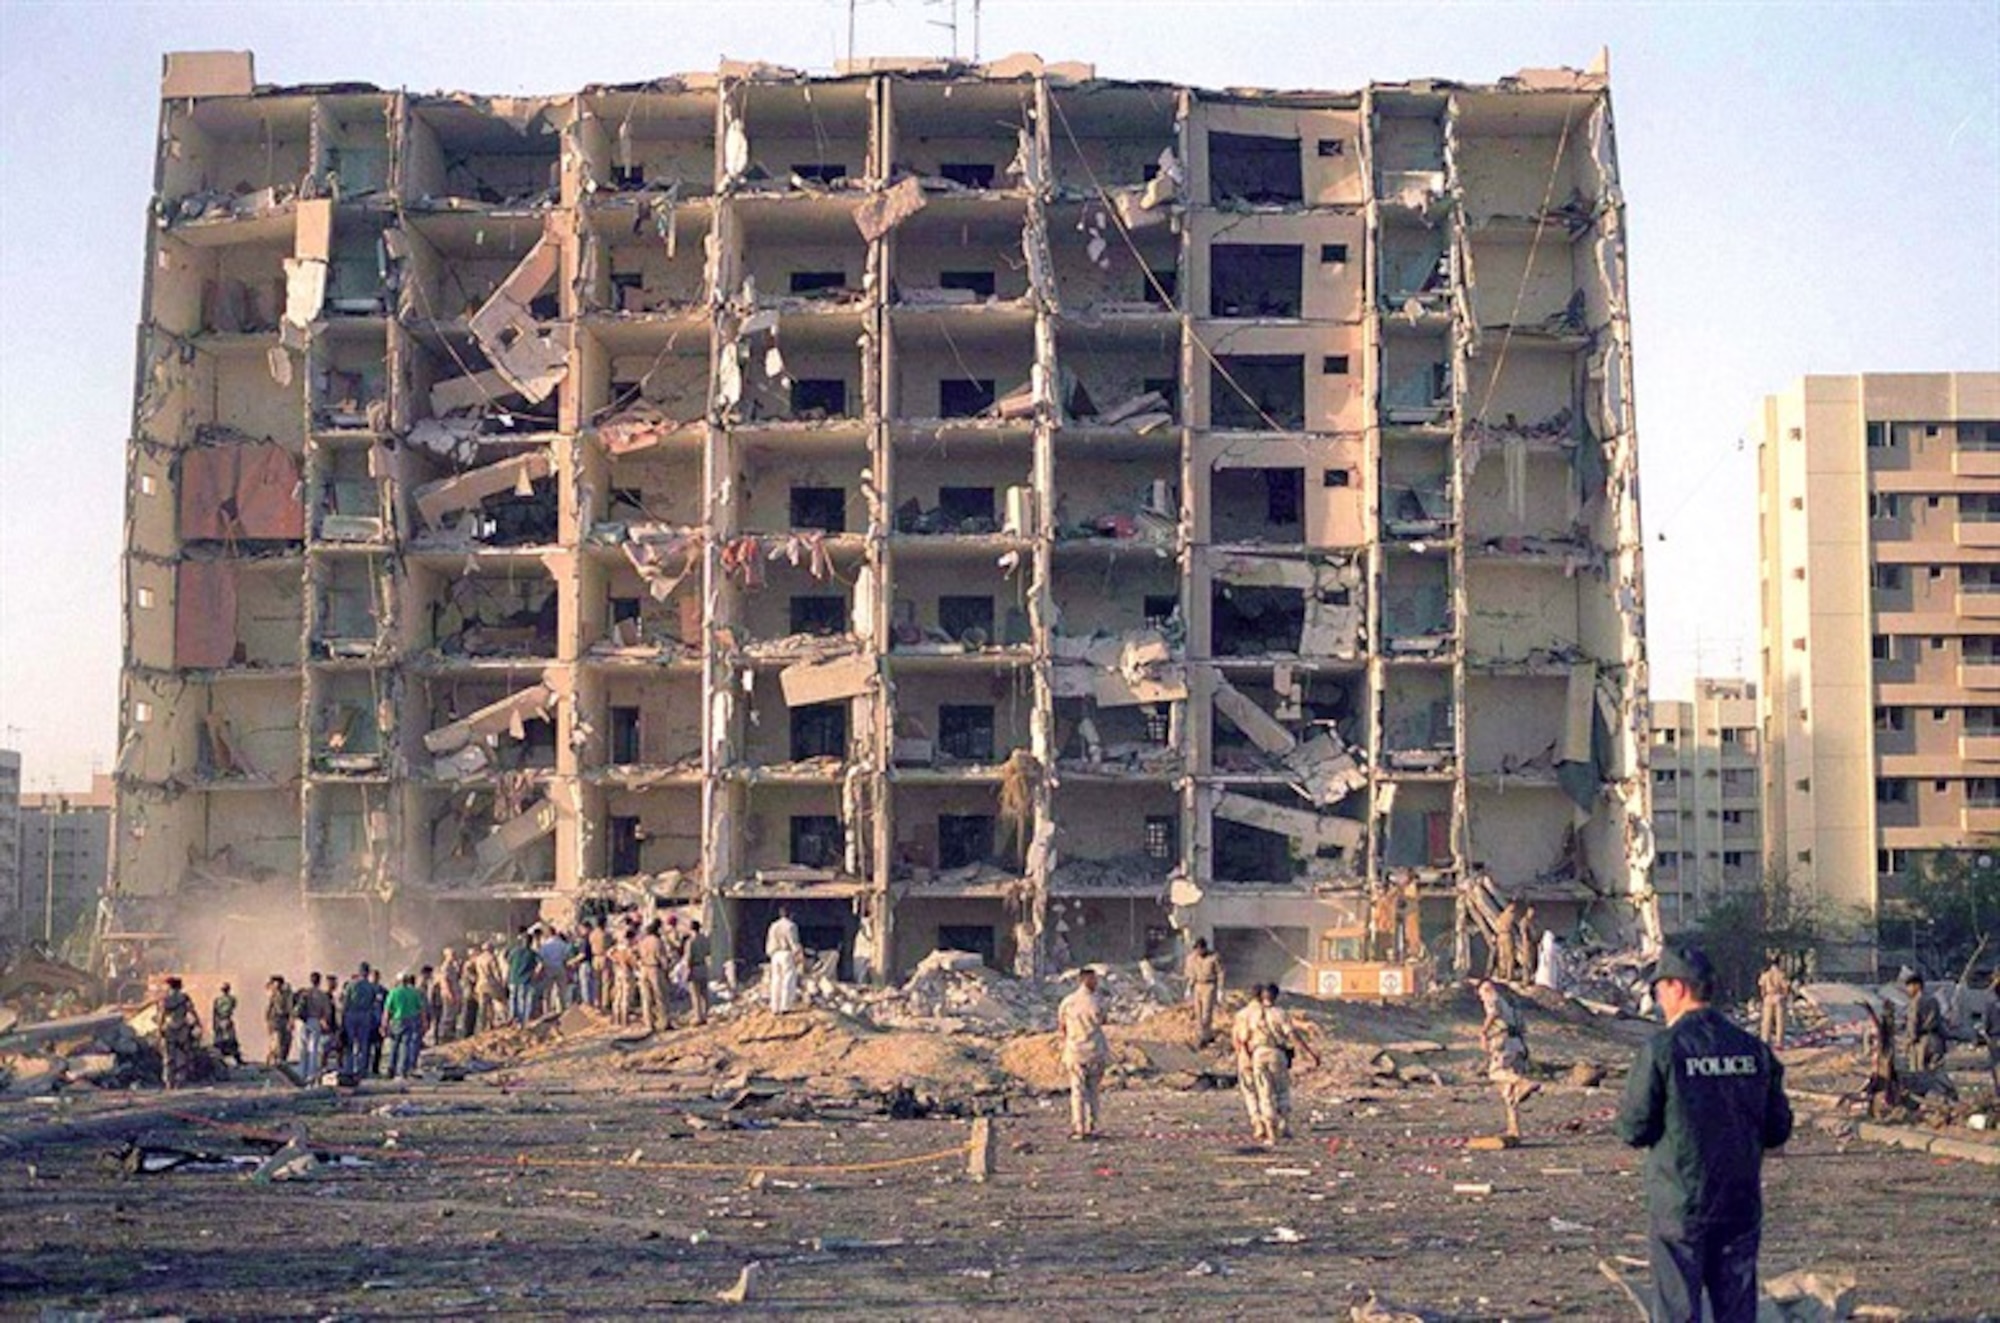 The 1996 Khobar Towers bombing, which killed 19 Airmen and injured hundreds more, was the catalyst for creating the AST. Pictured is the front of building 131, which was blown off when terrorists detonated a fuel truck parked nearby. (Air Force News Service)